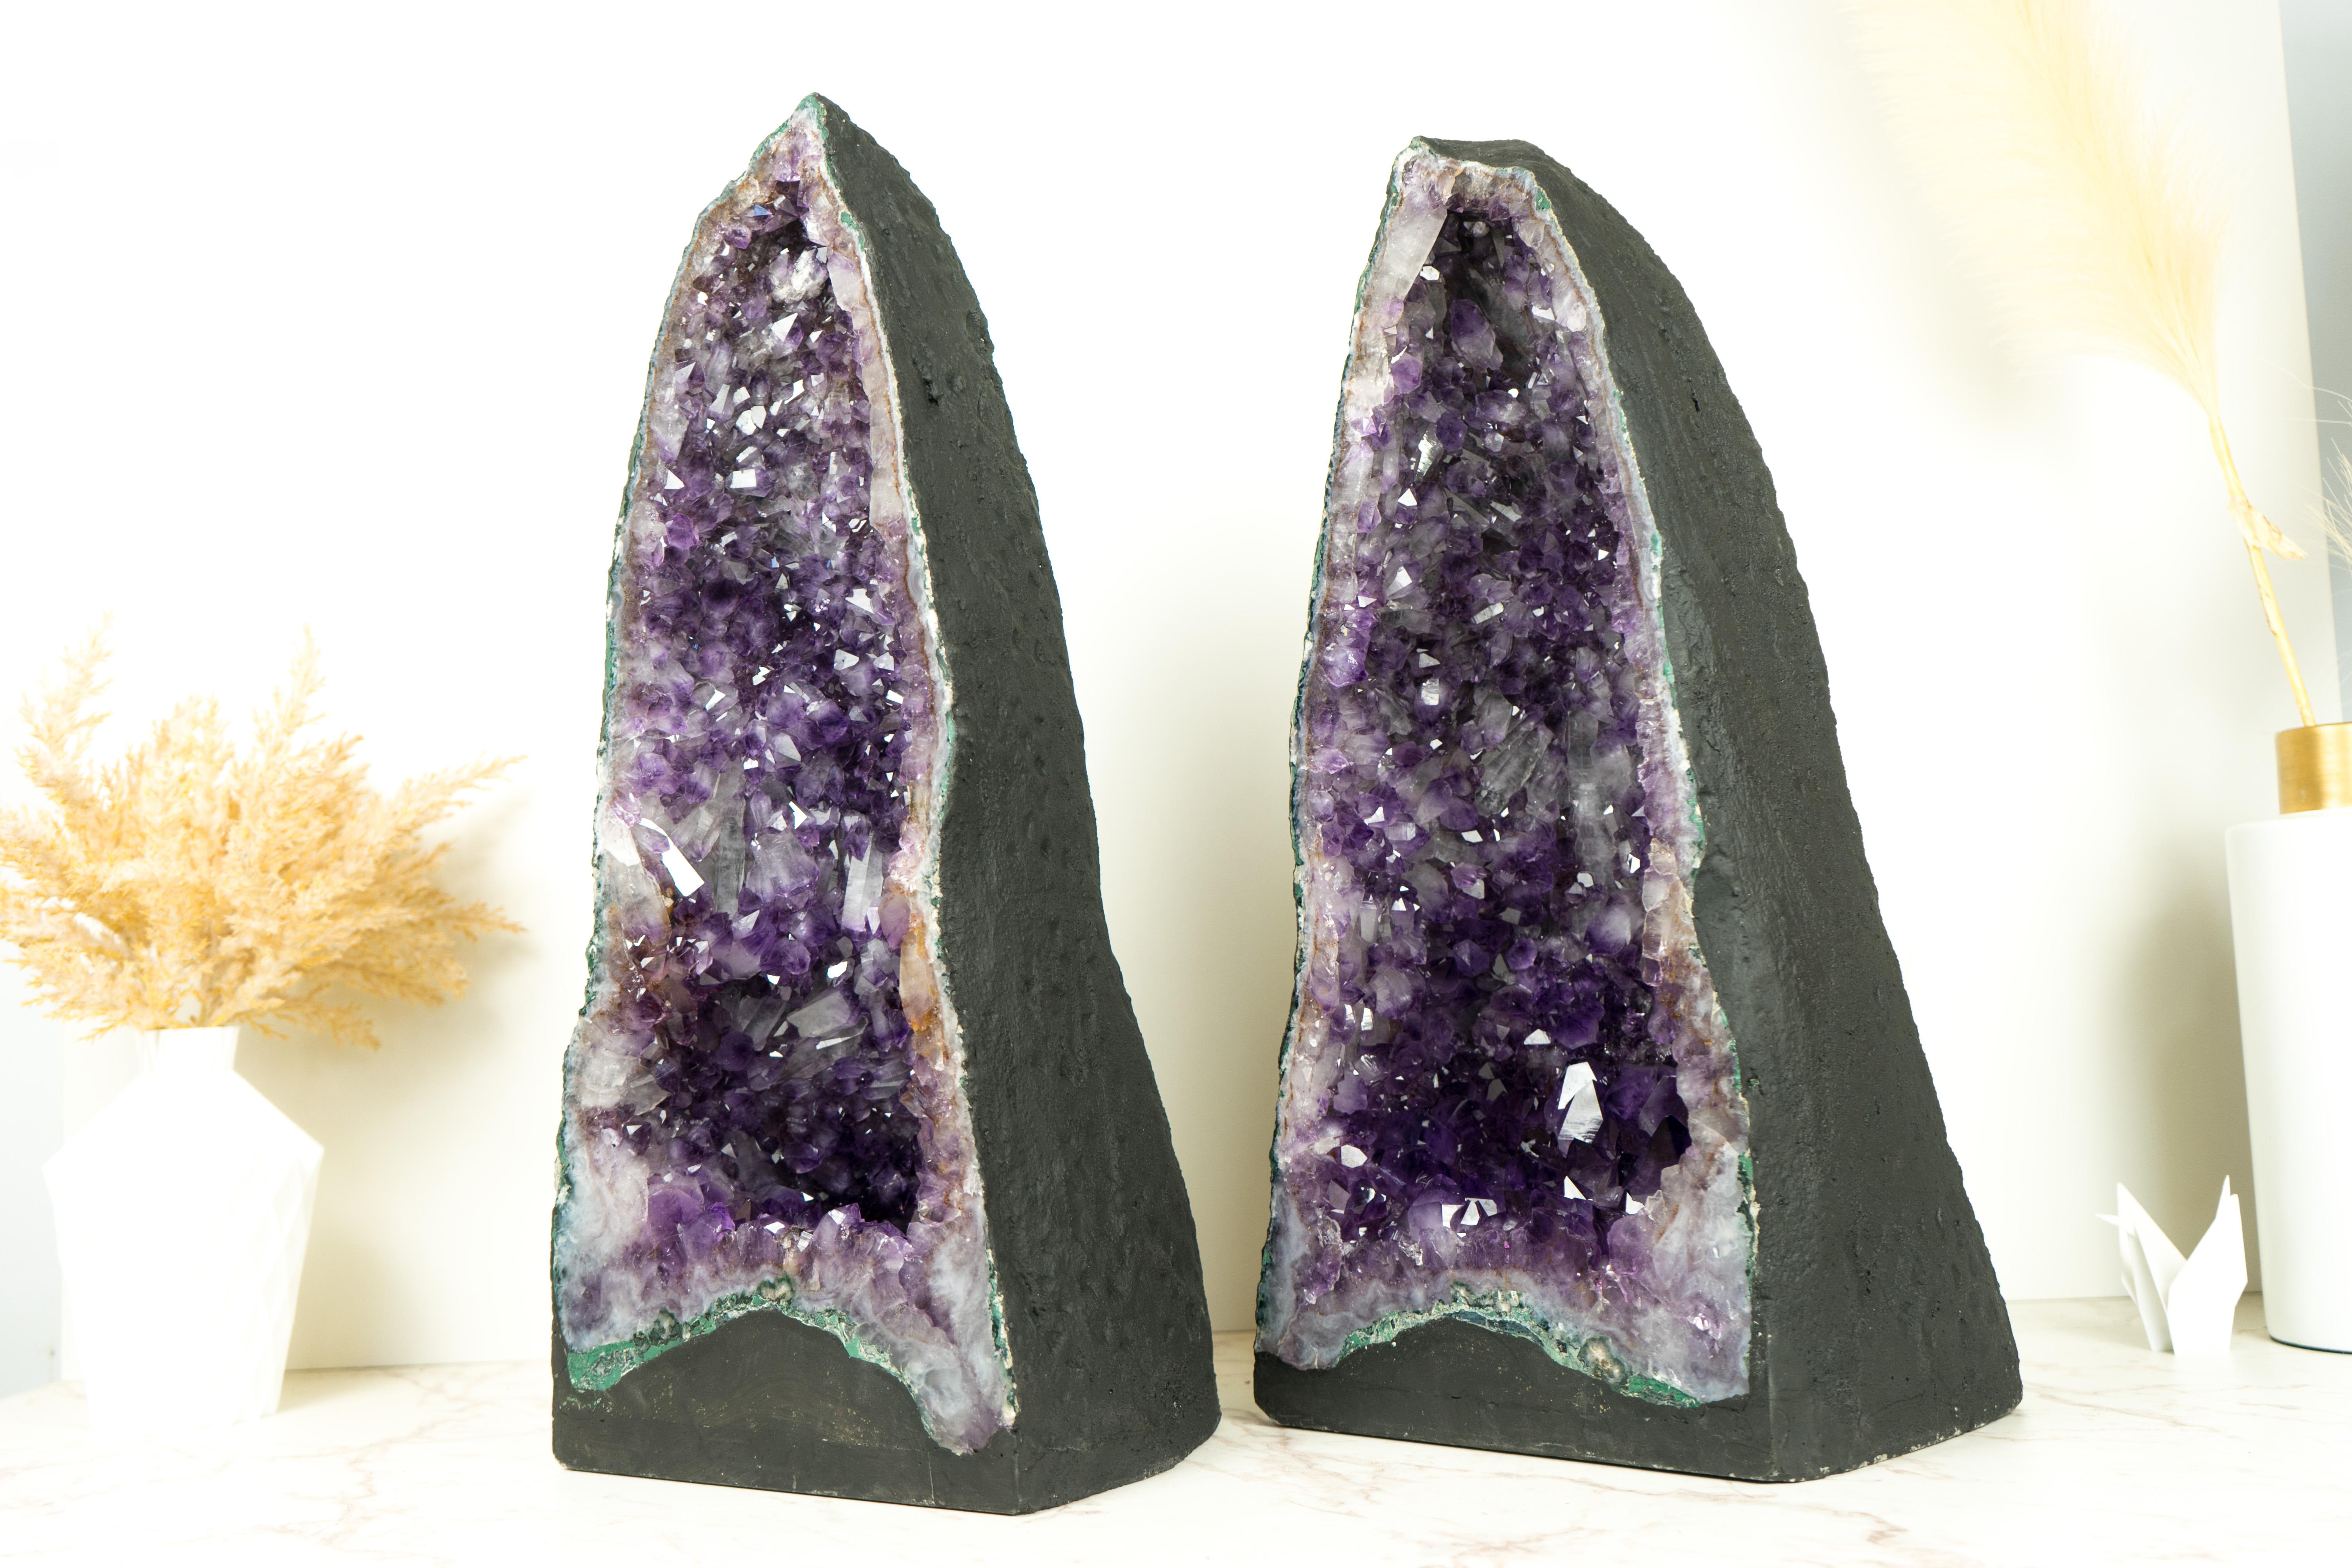 Pair of Tall Deep Purple Amethyst Crystal Geode Cathedrals, with Rare Druzy For Sale 1